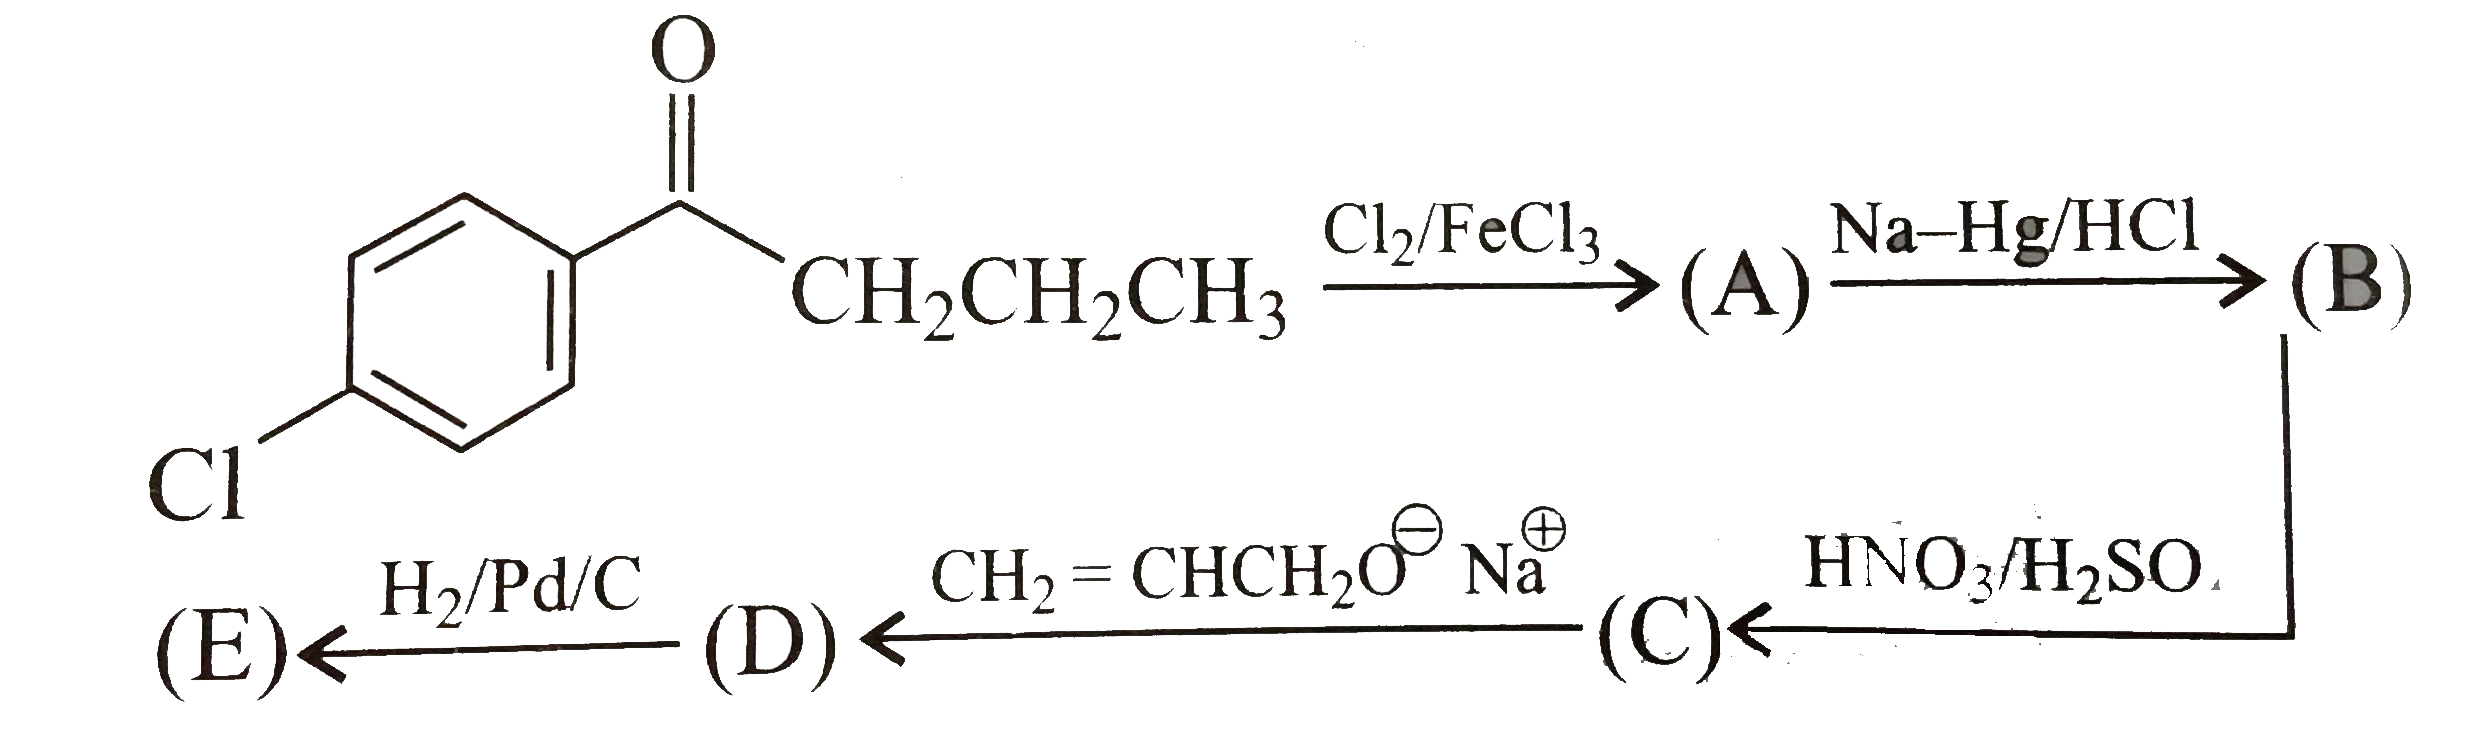 Statement 1: The product (B) formed will be a racemic mixture.   Statement 2: The above reaction is oxymercuration and demercuration, and it proceeds via the addition of D(2)O, according to Markovnikov's rule, and with antiregiospecificity.